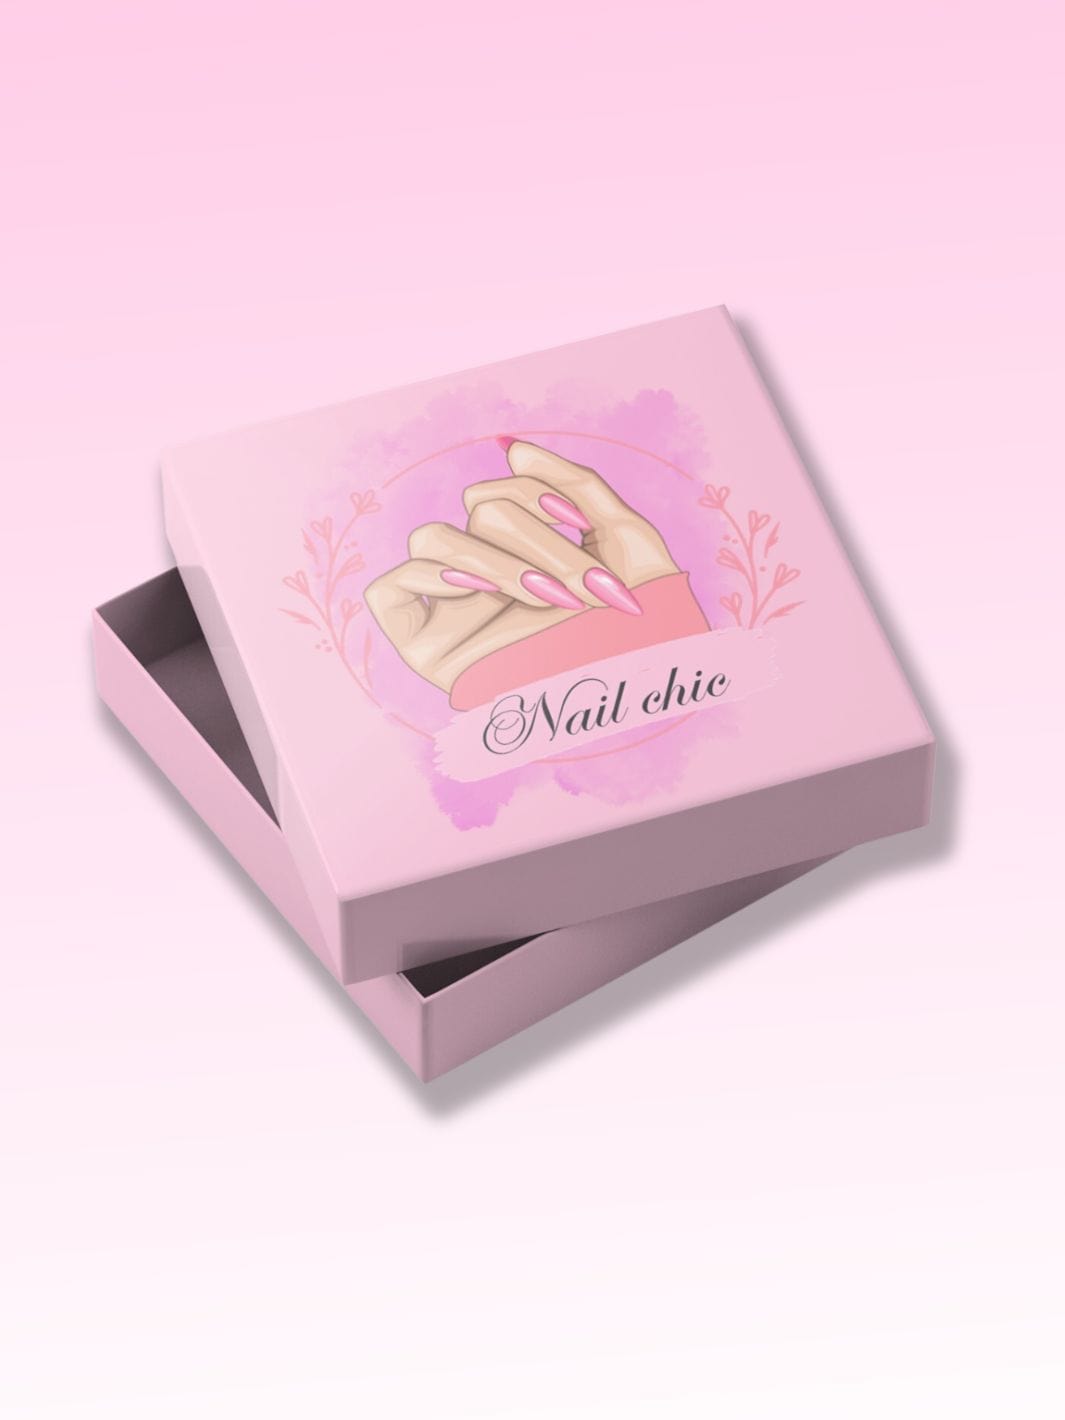 Kit ongle poudre acrylique Nail Chic